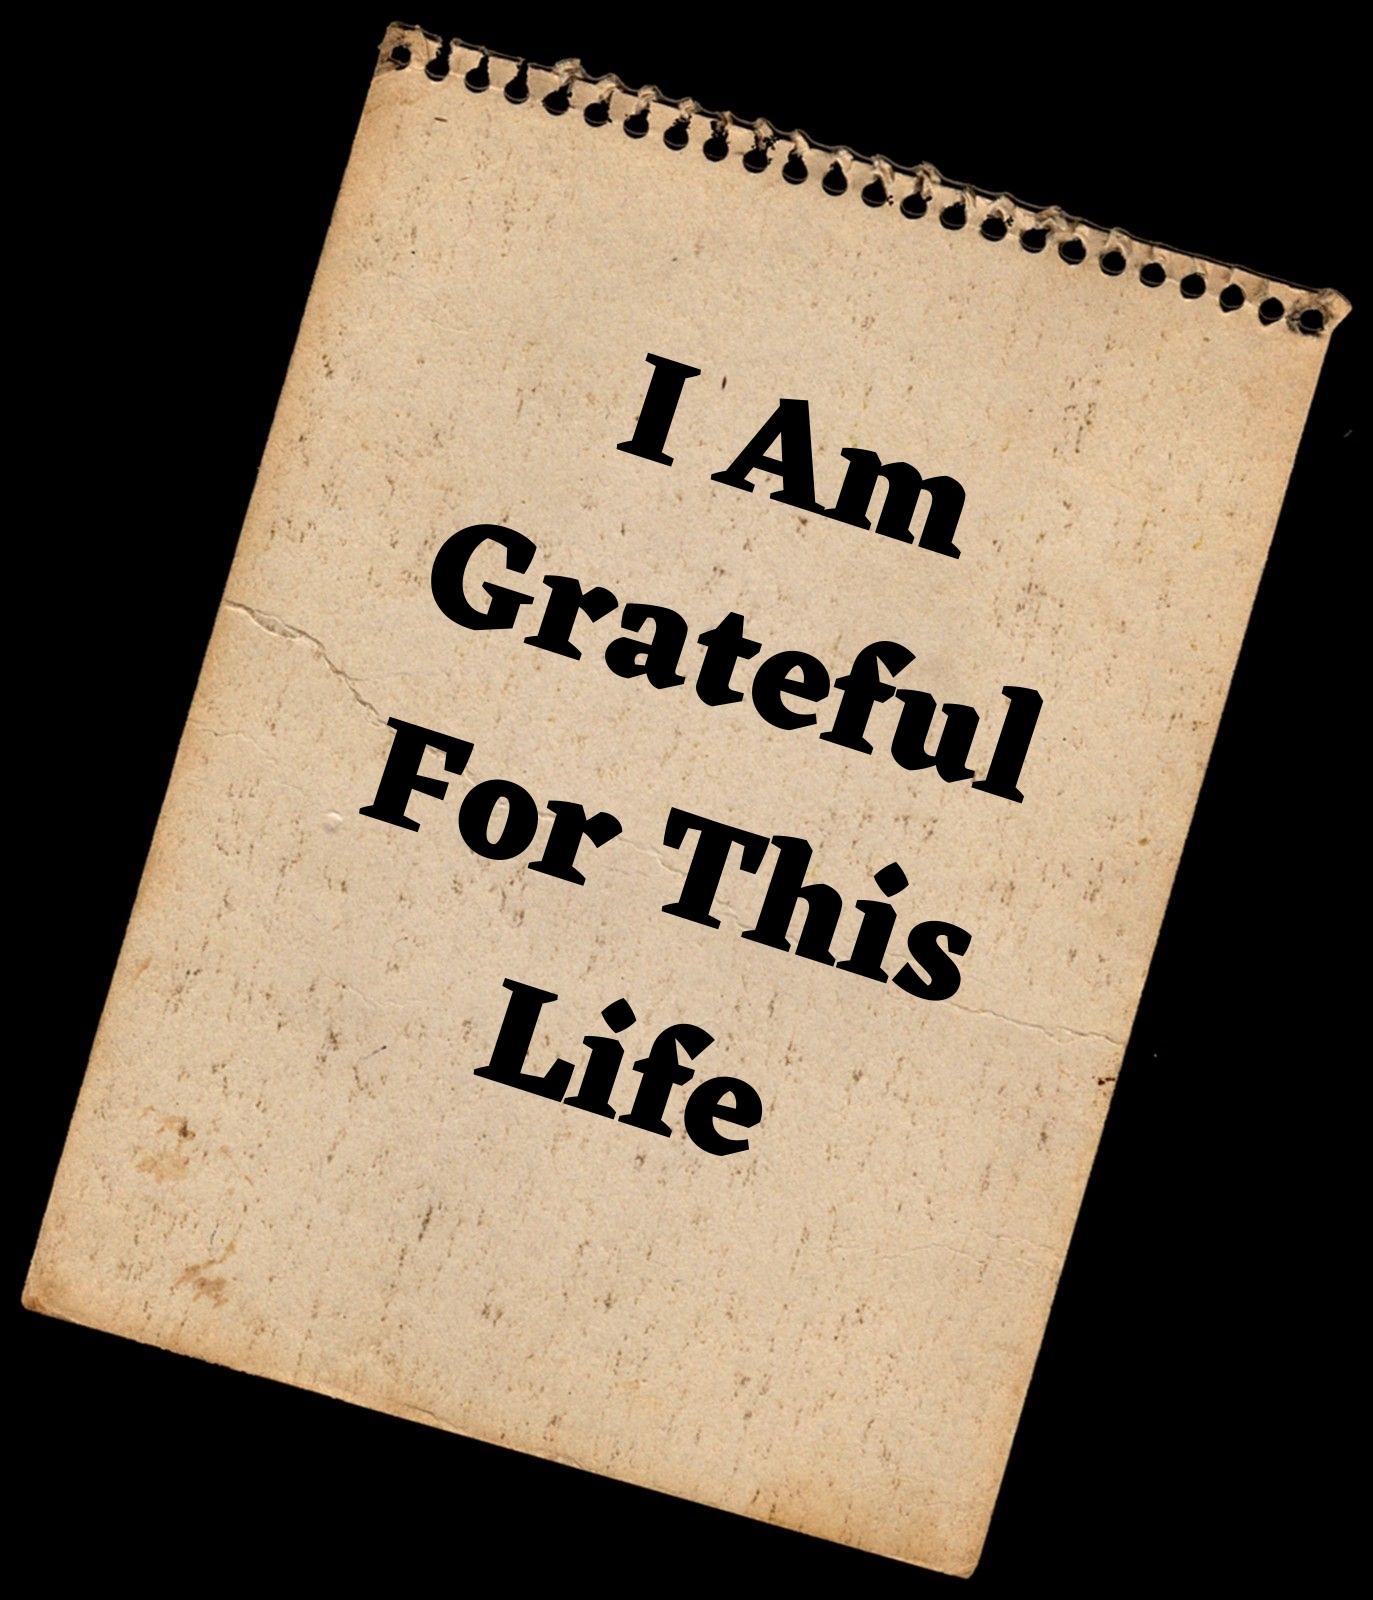  I am grateful for this life.